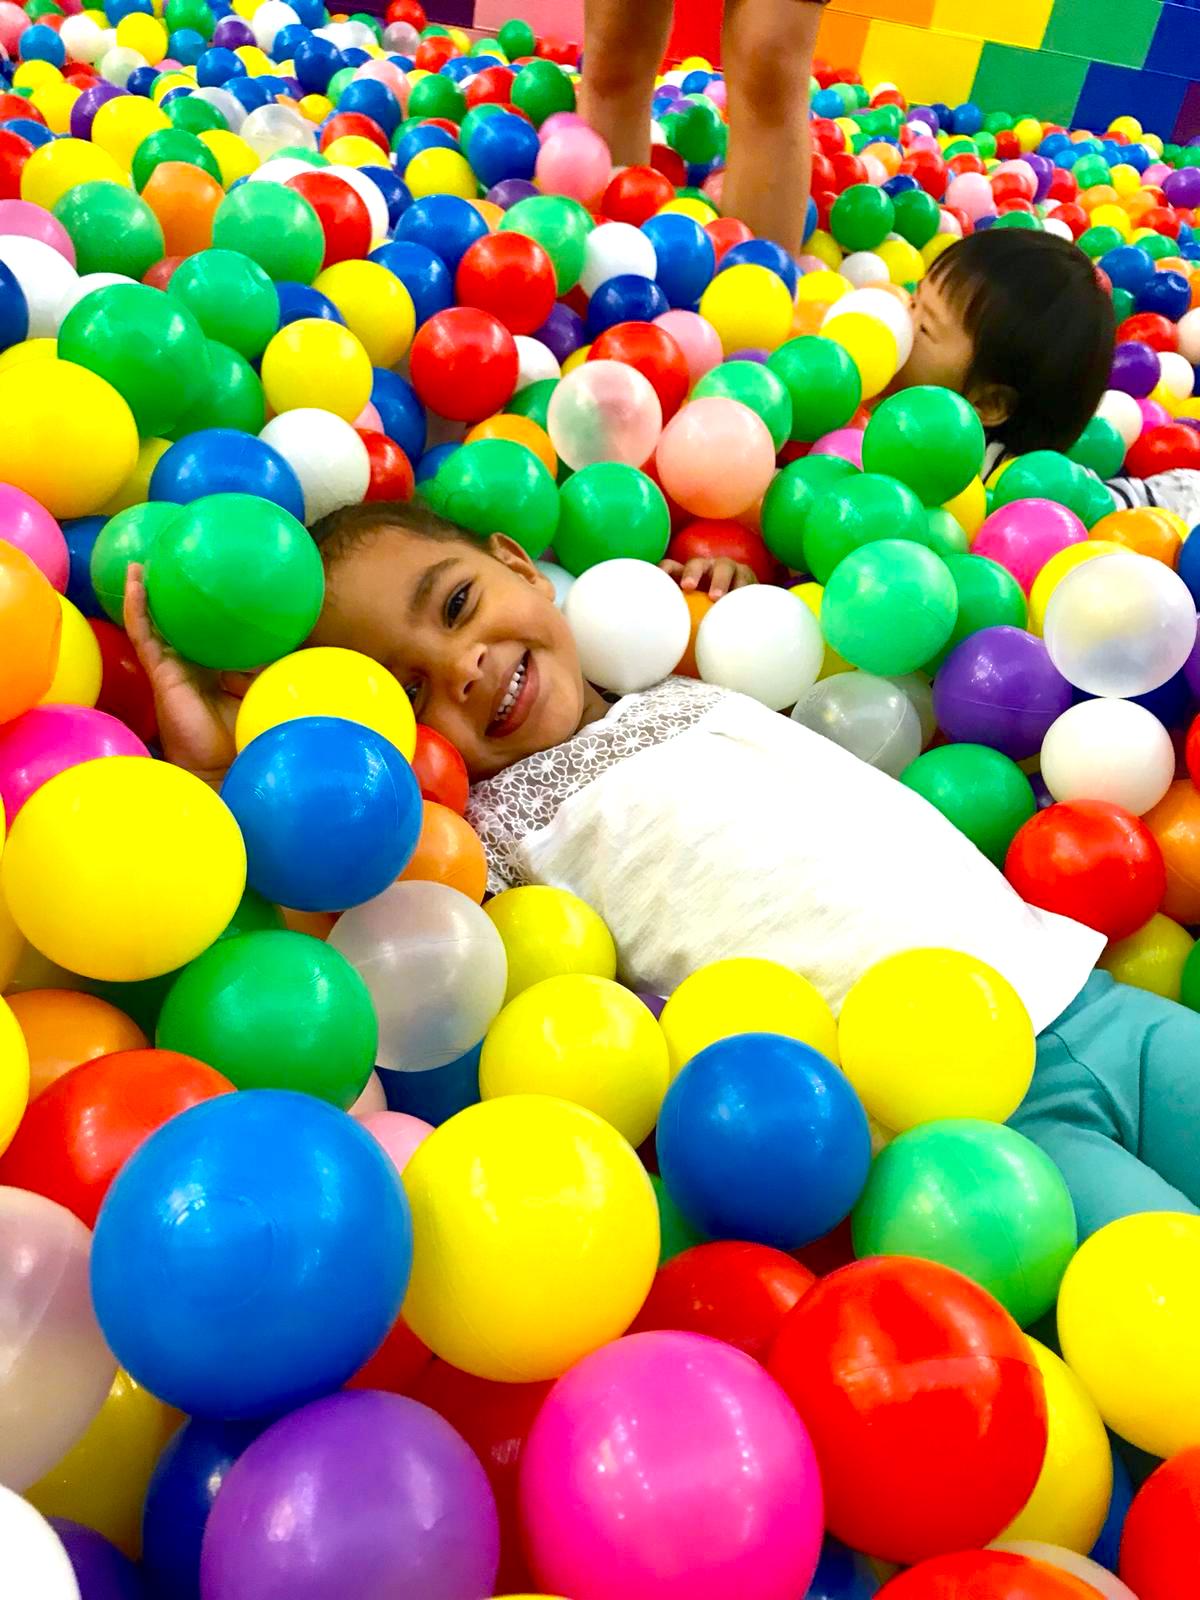 giant ball pit in mall